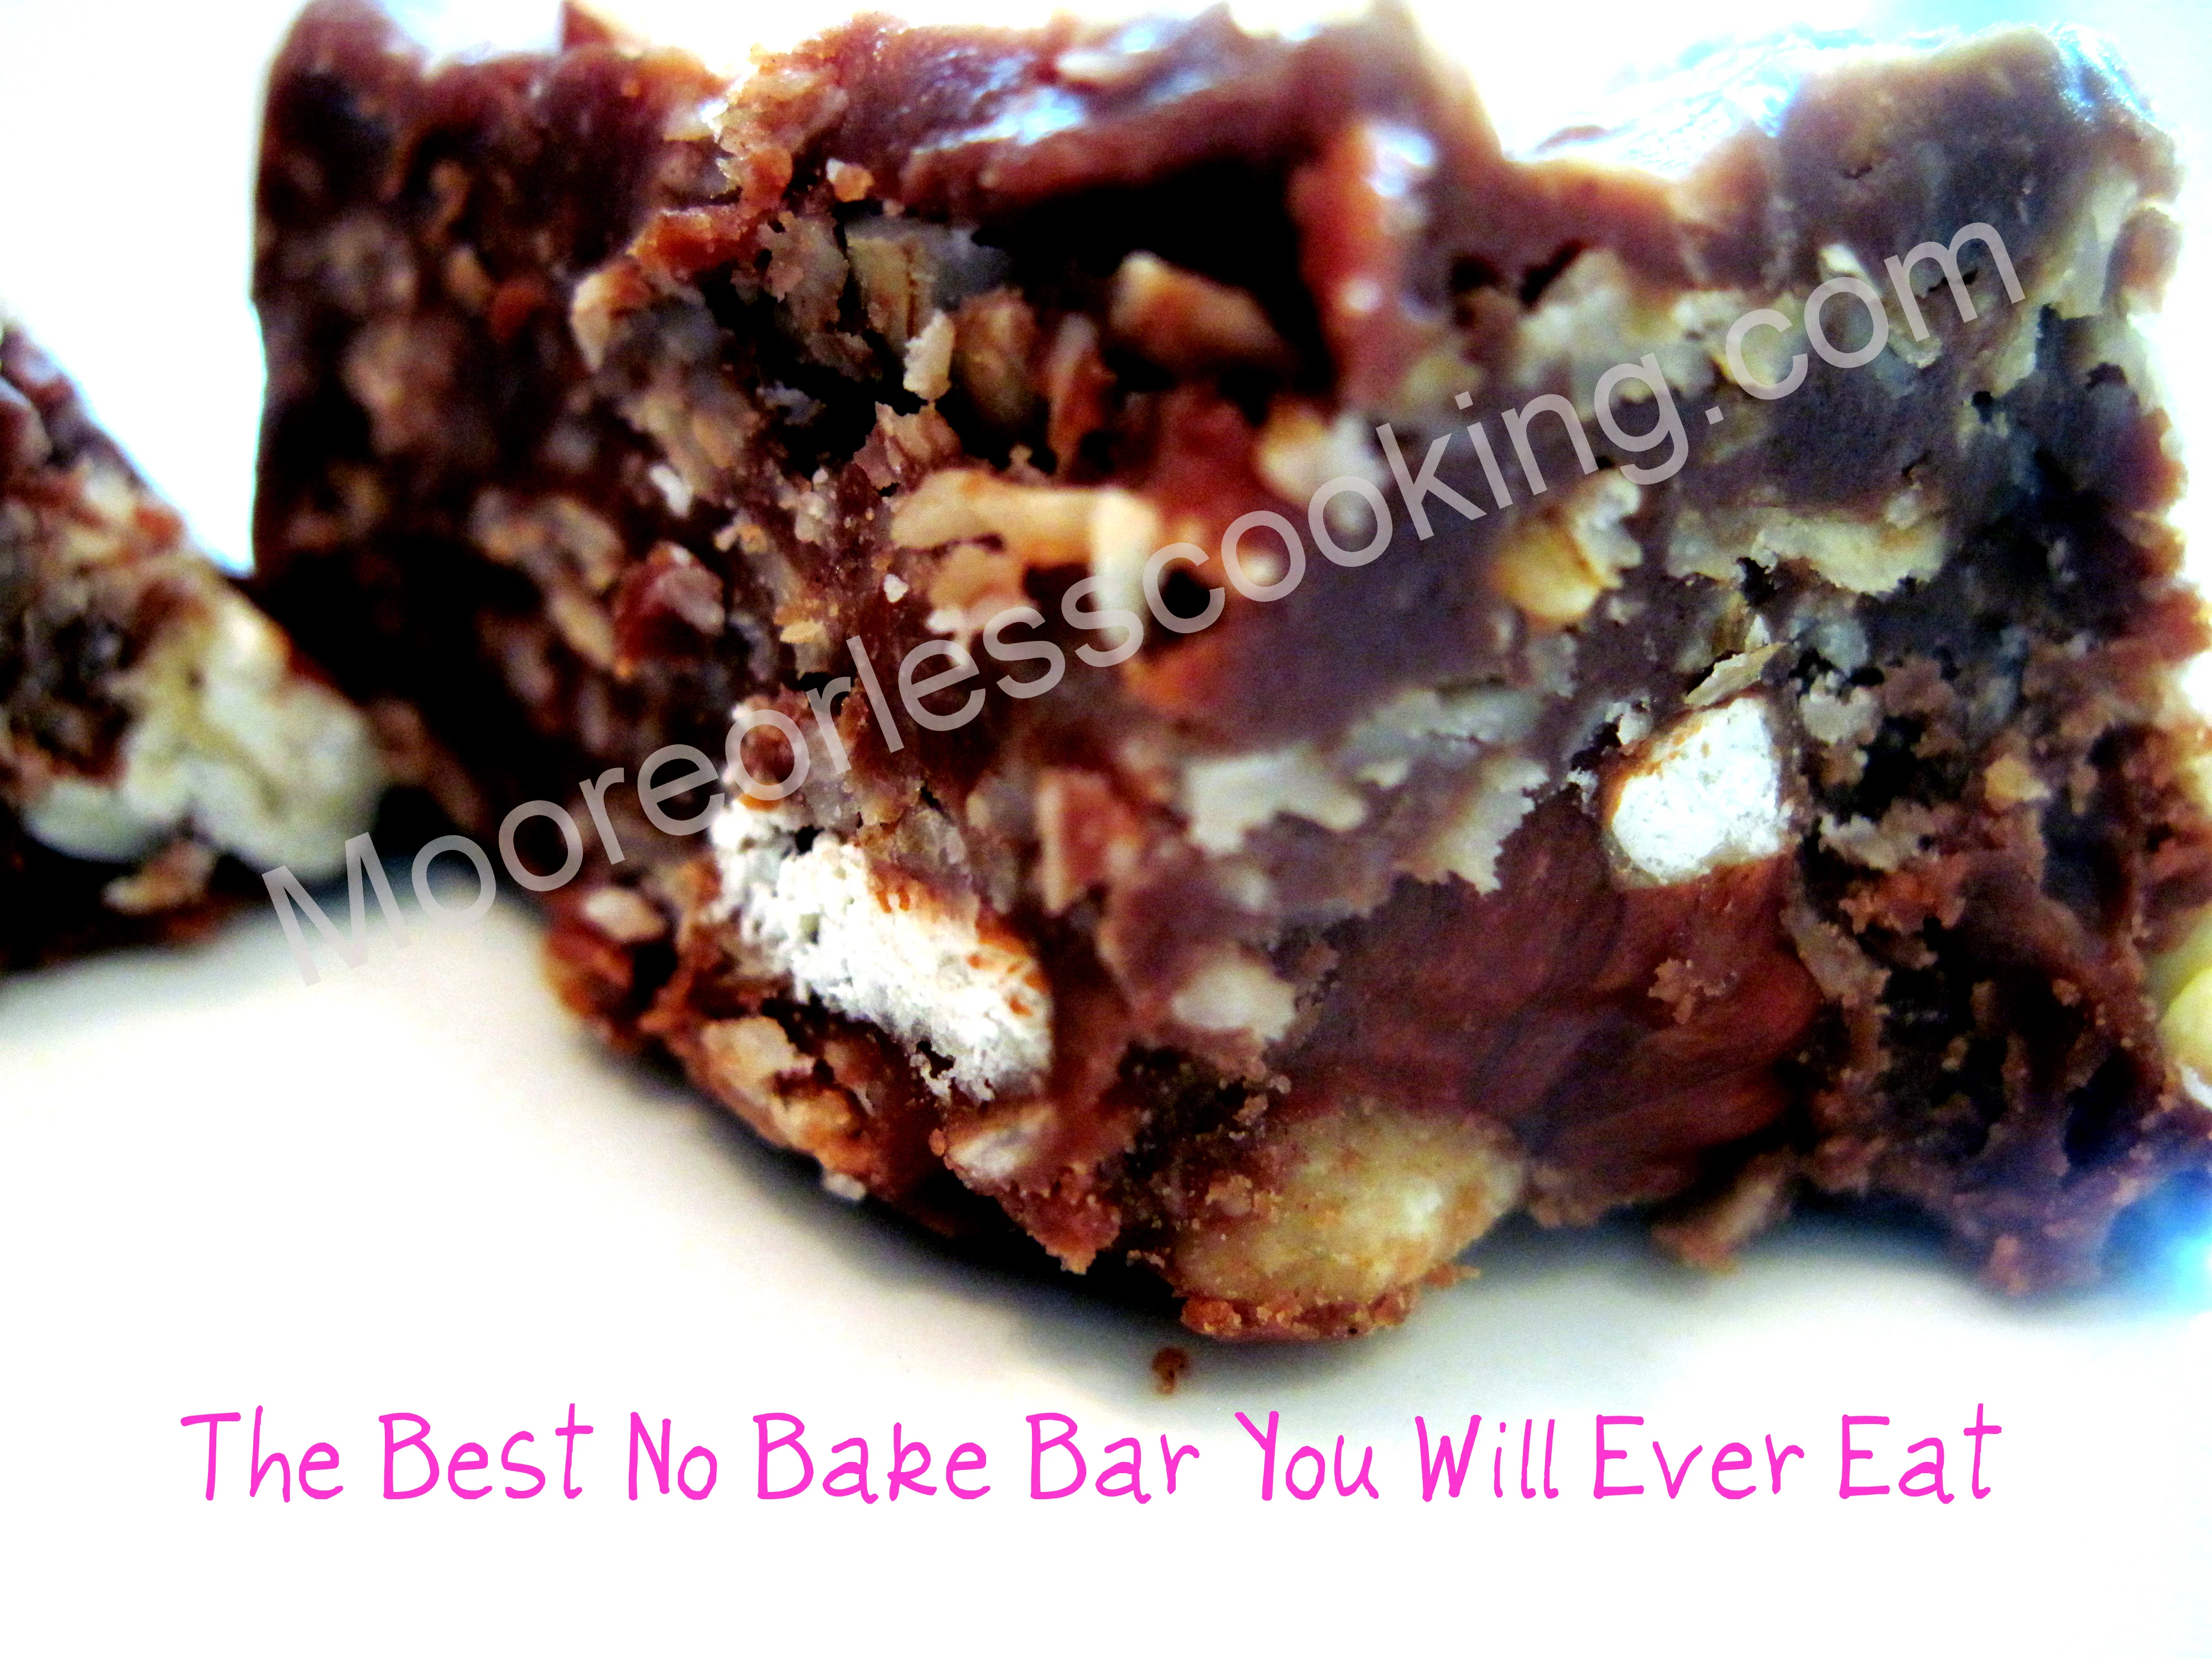 The Best No Bake Bar You Will Ever Eat